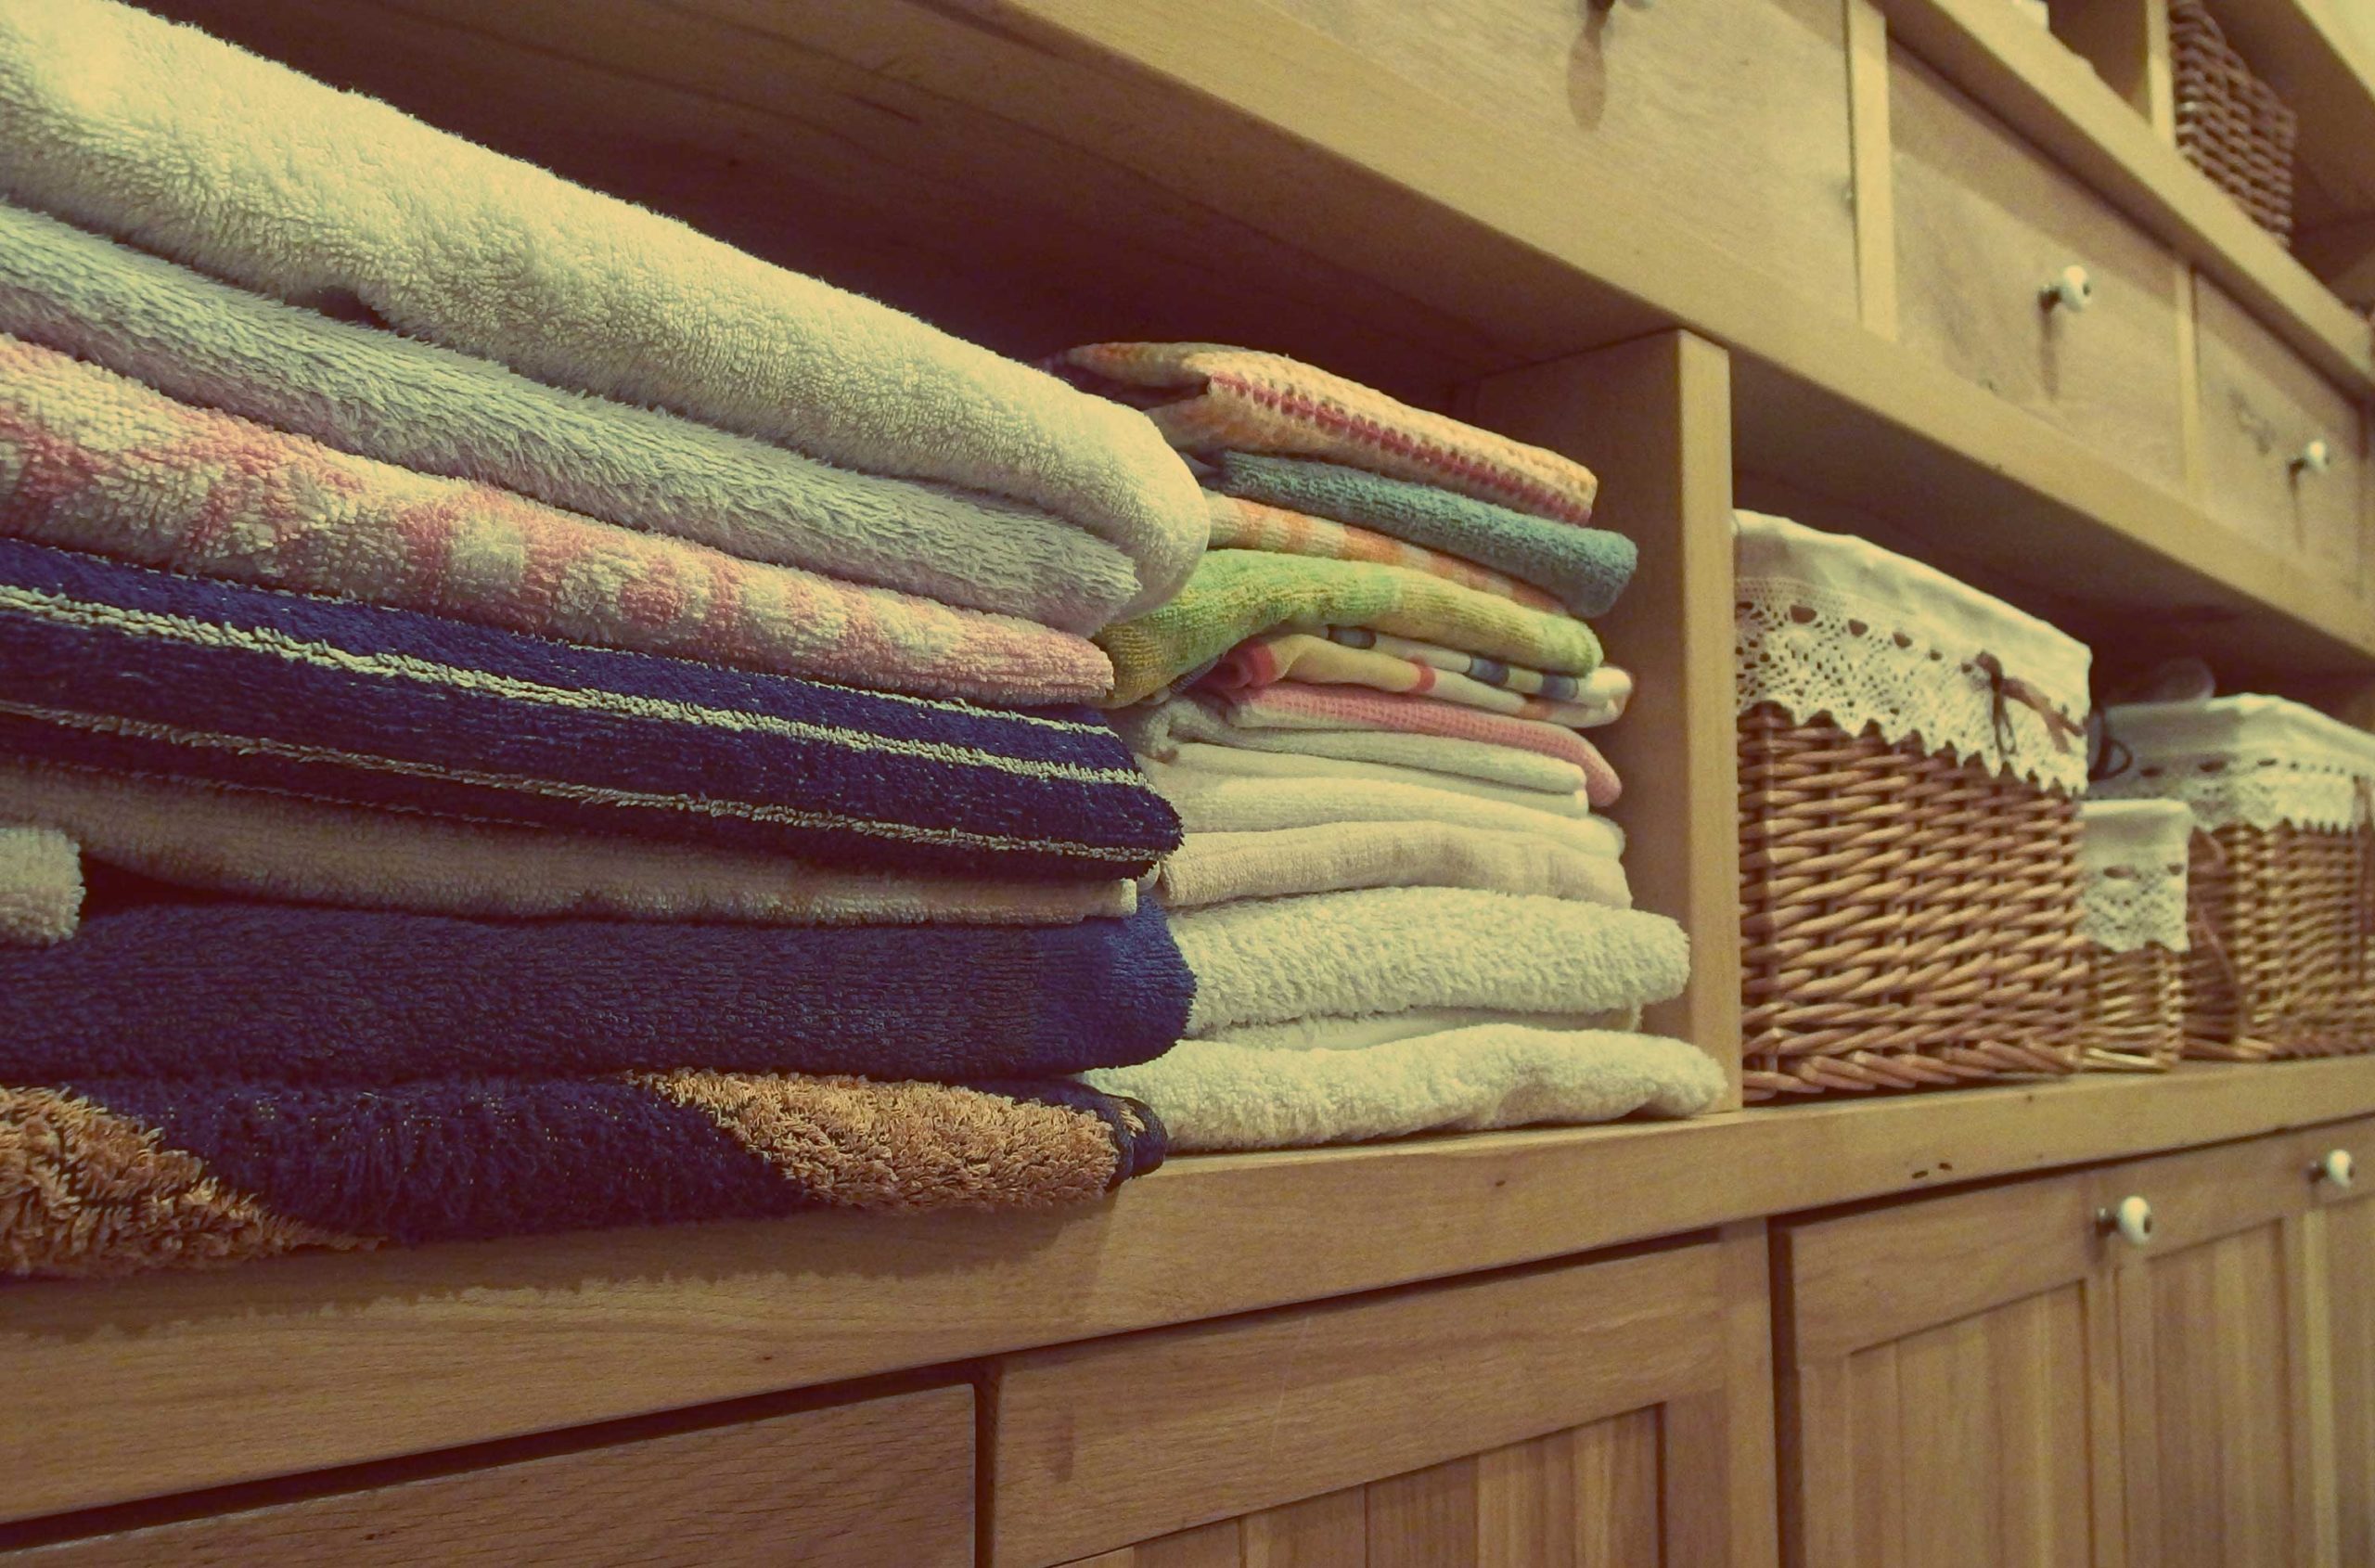 Laundry Room Ideas Related to Design & Décor